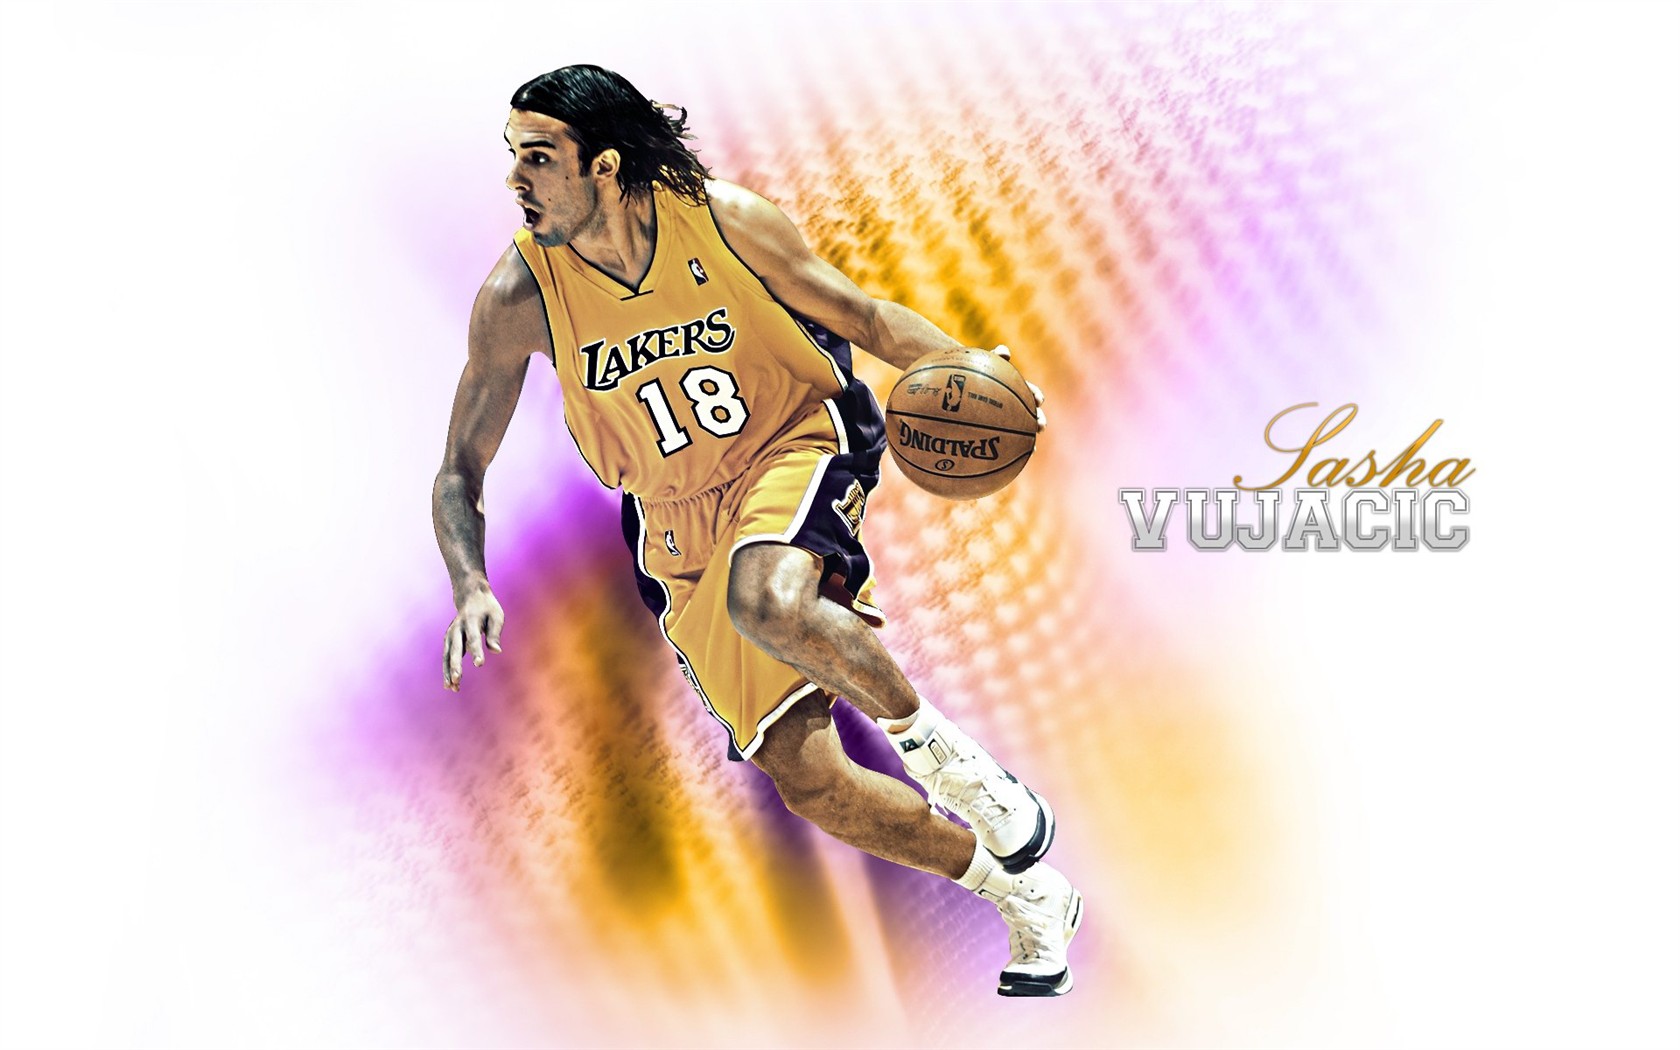 Los Angeles Lakers Official Wallpaper #23 - 1680x1050